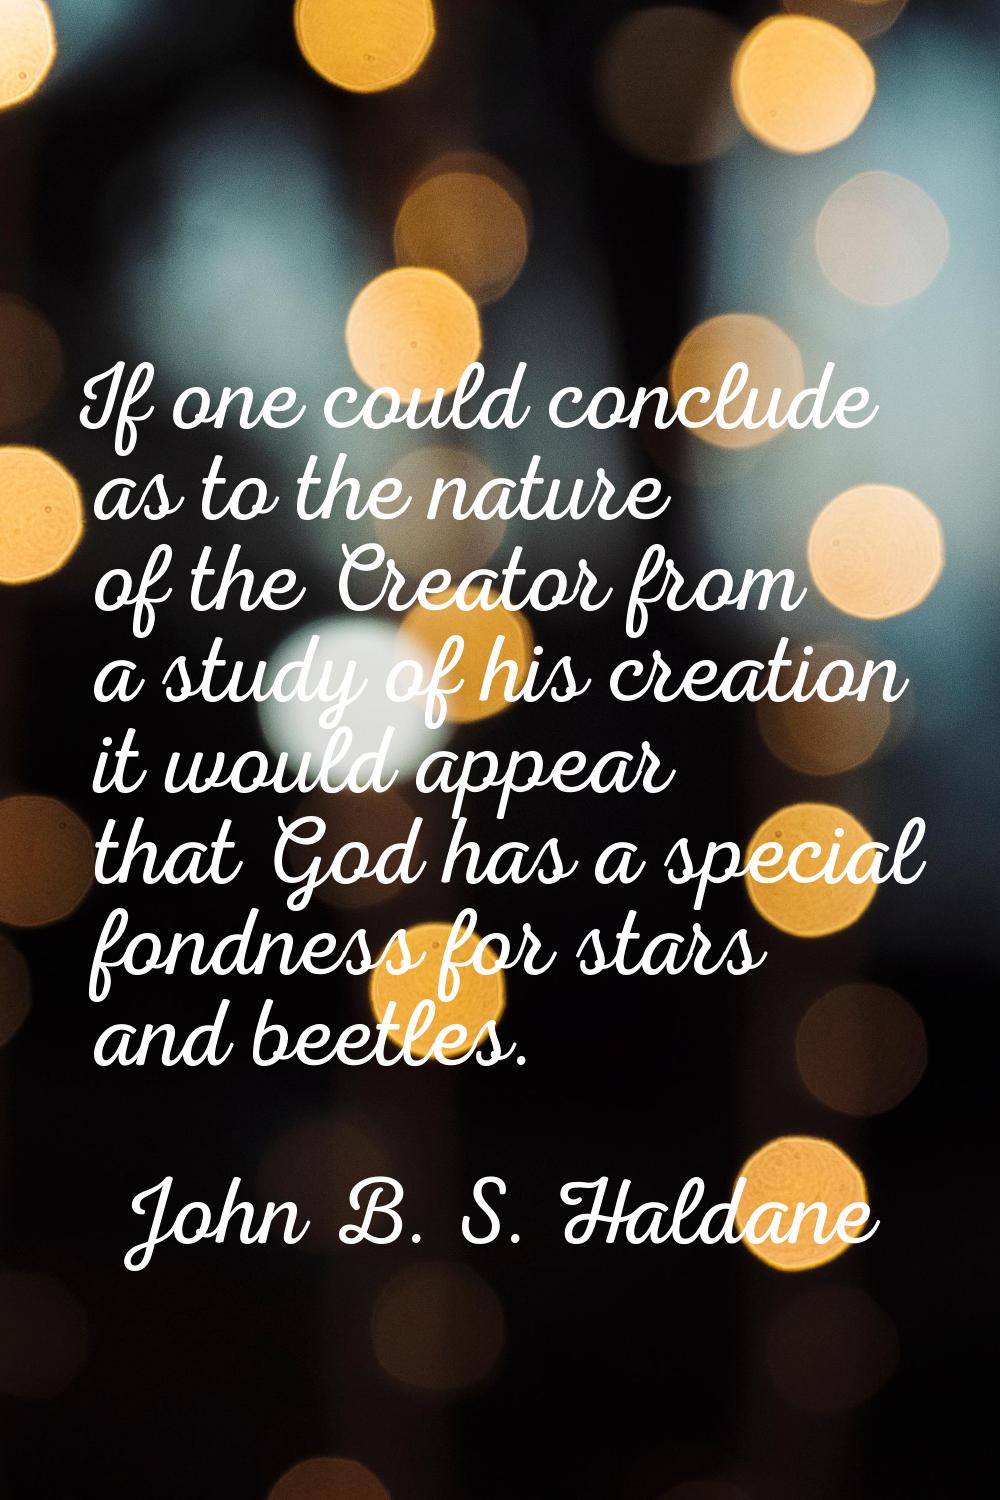 If one could conclude as to the nature of the Creator from a study of his creation it would appear 